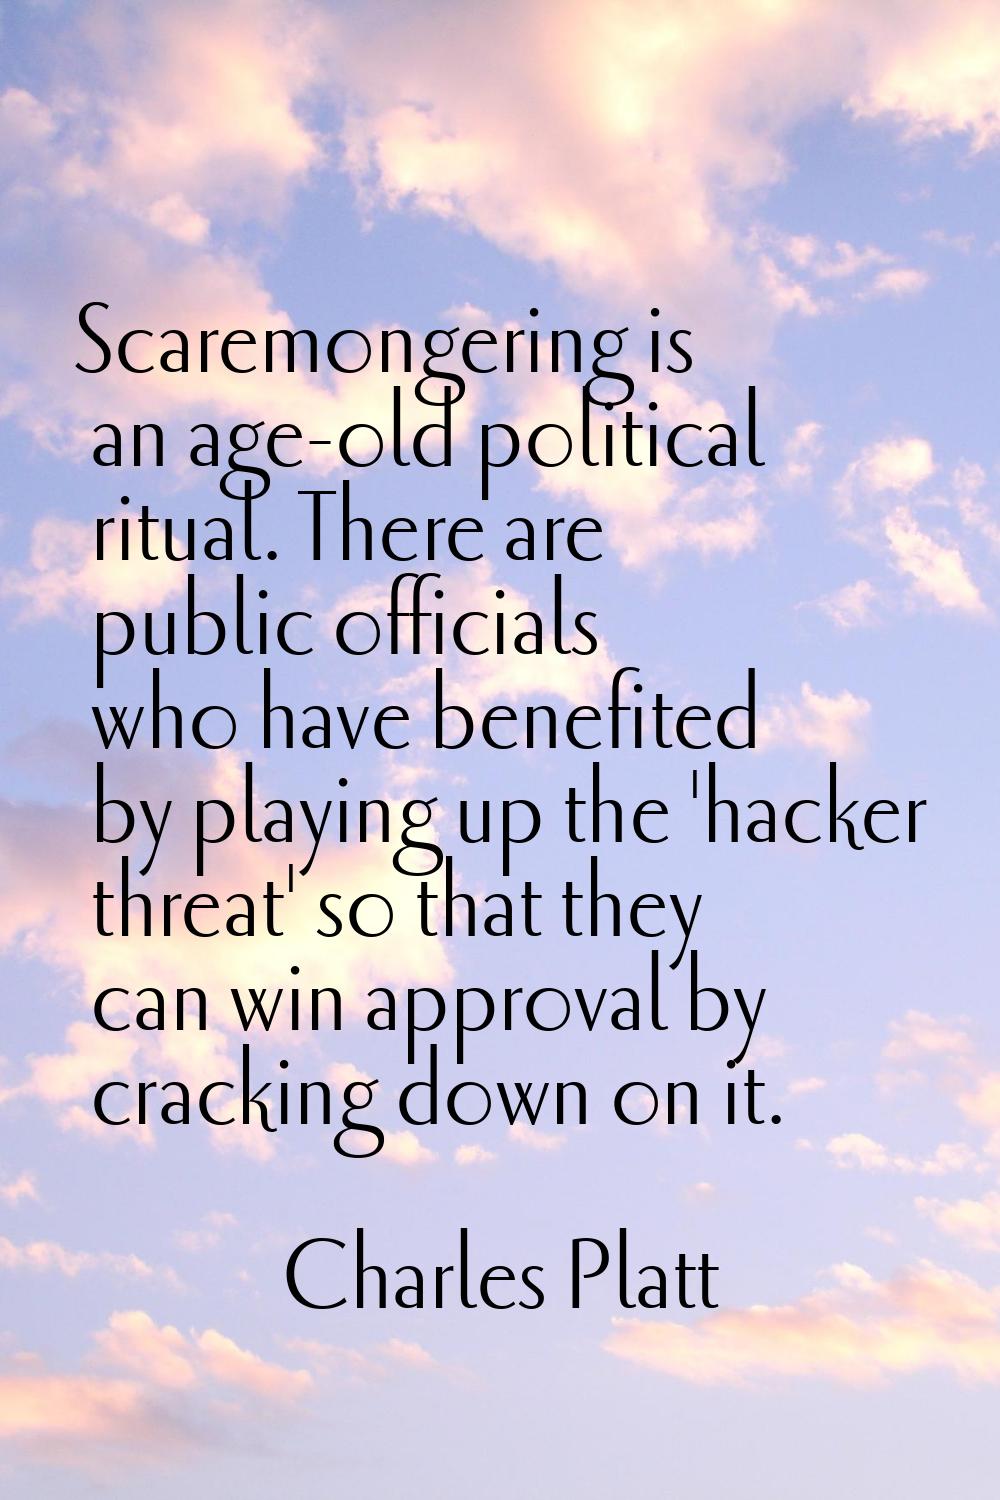 Scaremongering is an age-old political ritual. There are public officials who have benefited by pla